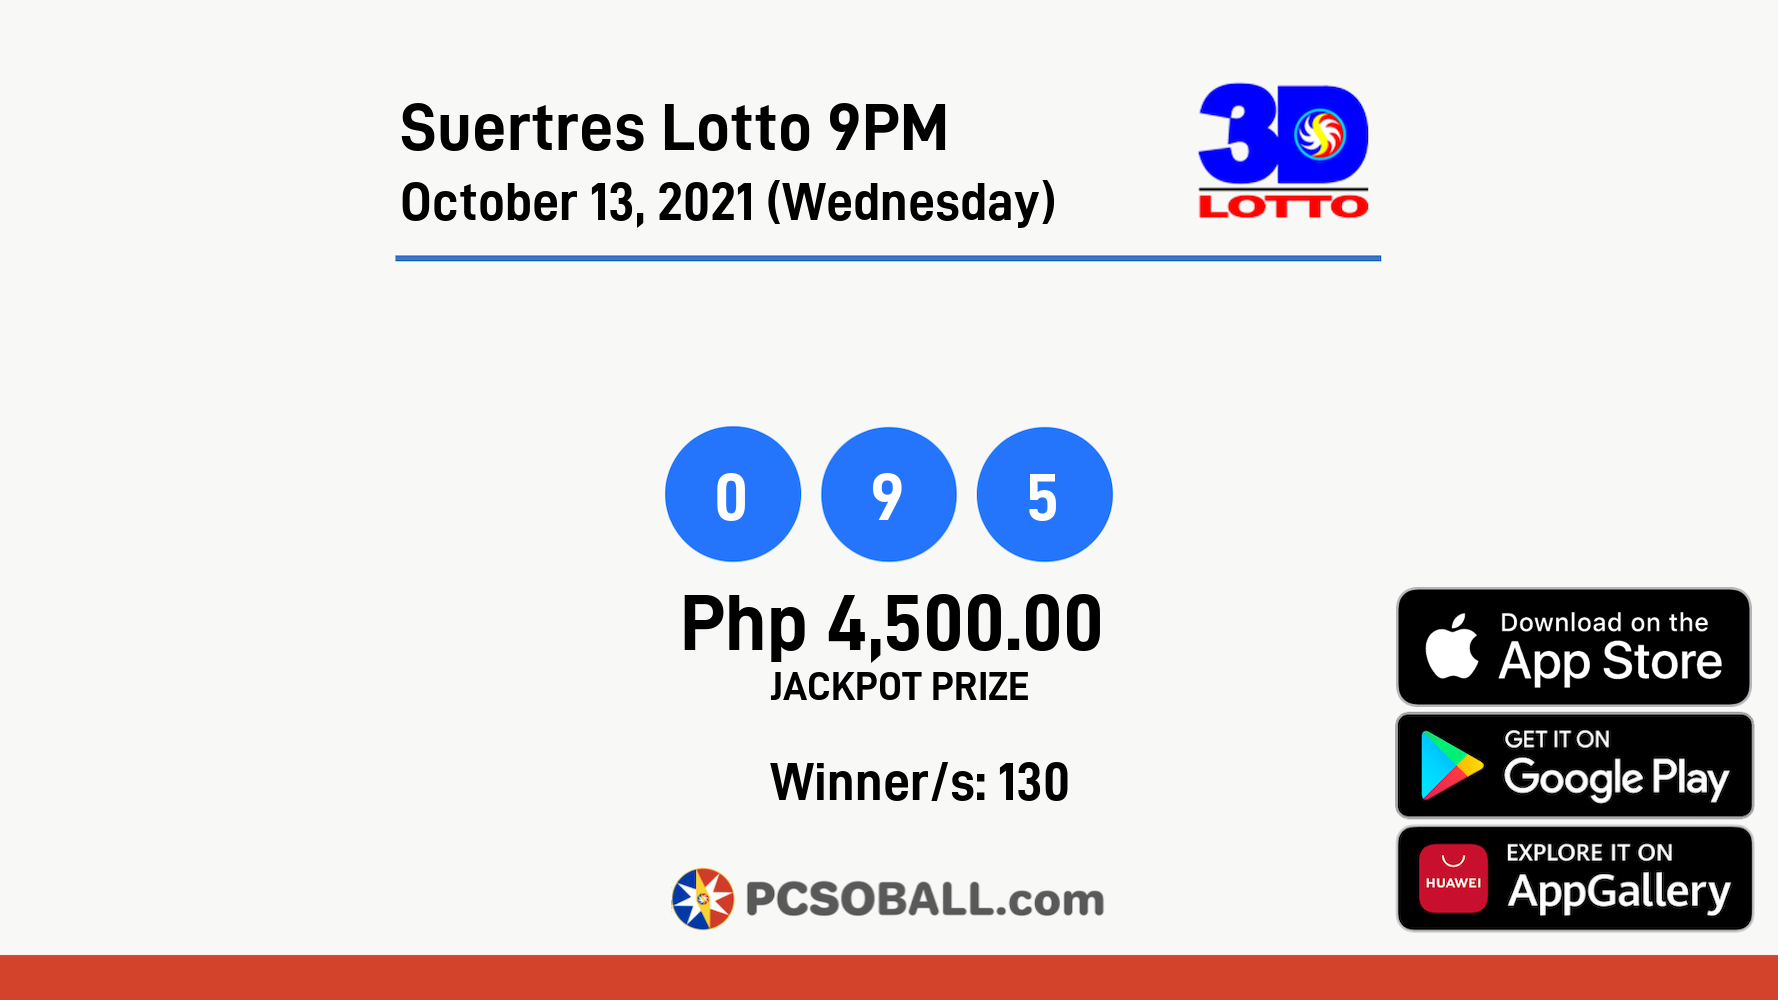 Suertres Lotto 9PM October 13, 2021 (Wednesday) Result